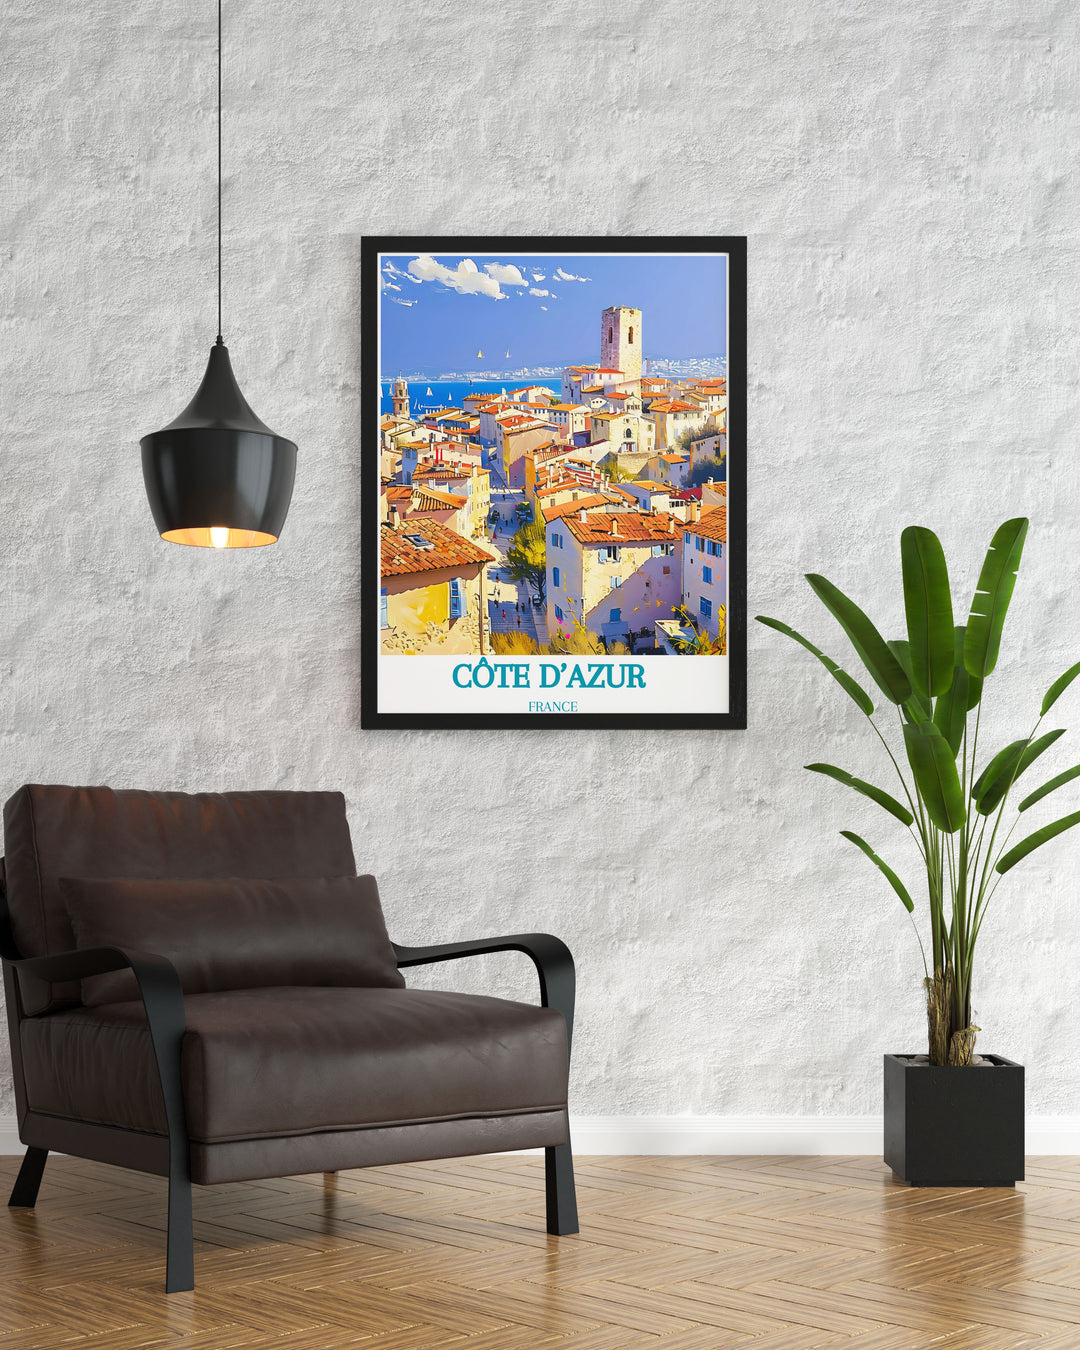 Vintage poster of the Côte dAzur, featuring the iconic Old Town of Antibes, France. This piece captures the timeless beauty of the region with its charming streets, ancient walls, and azure waters, evoking the charm of the Mediterranean coast.